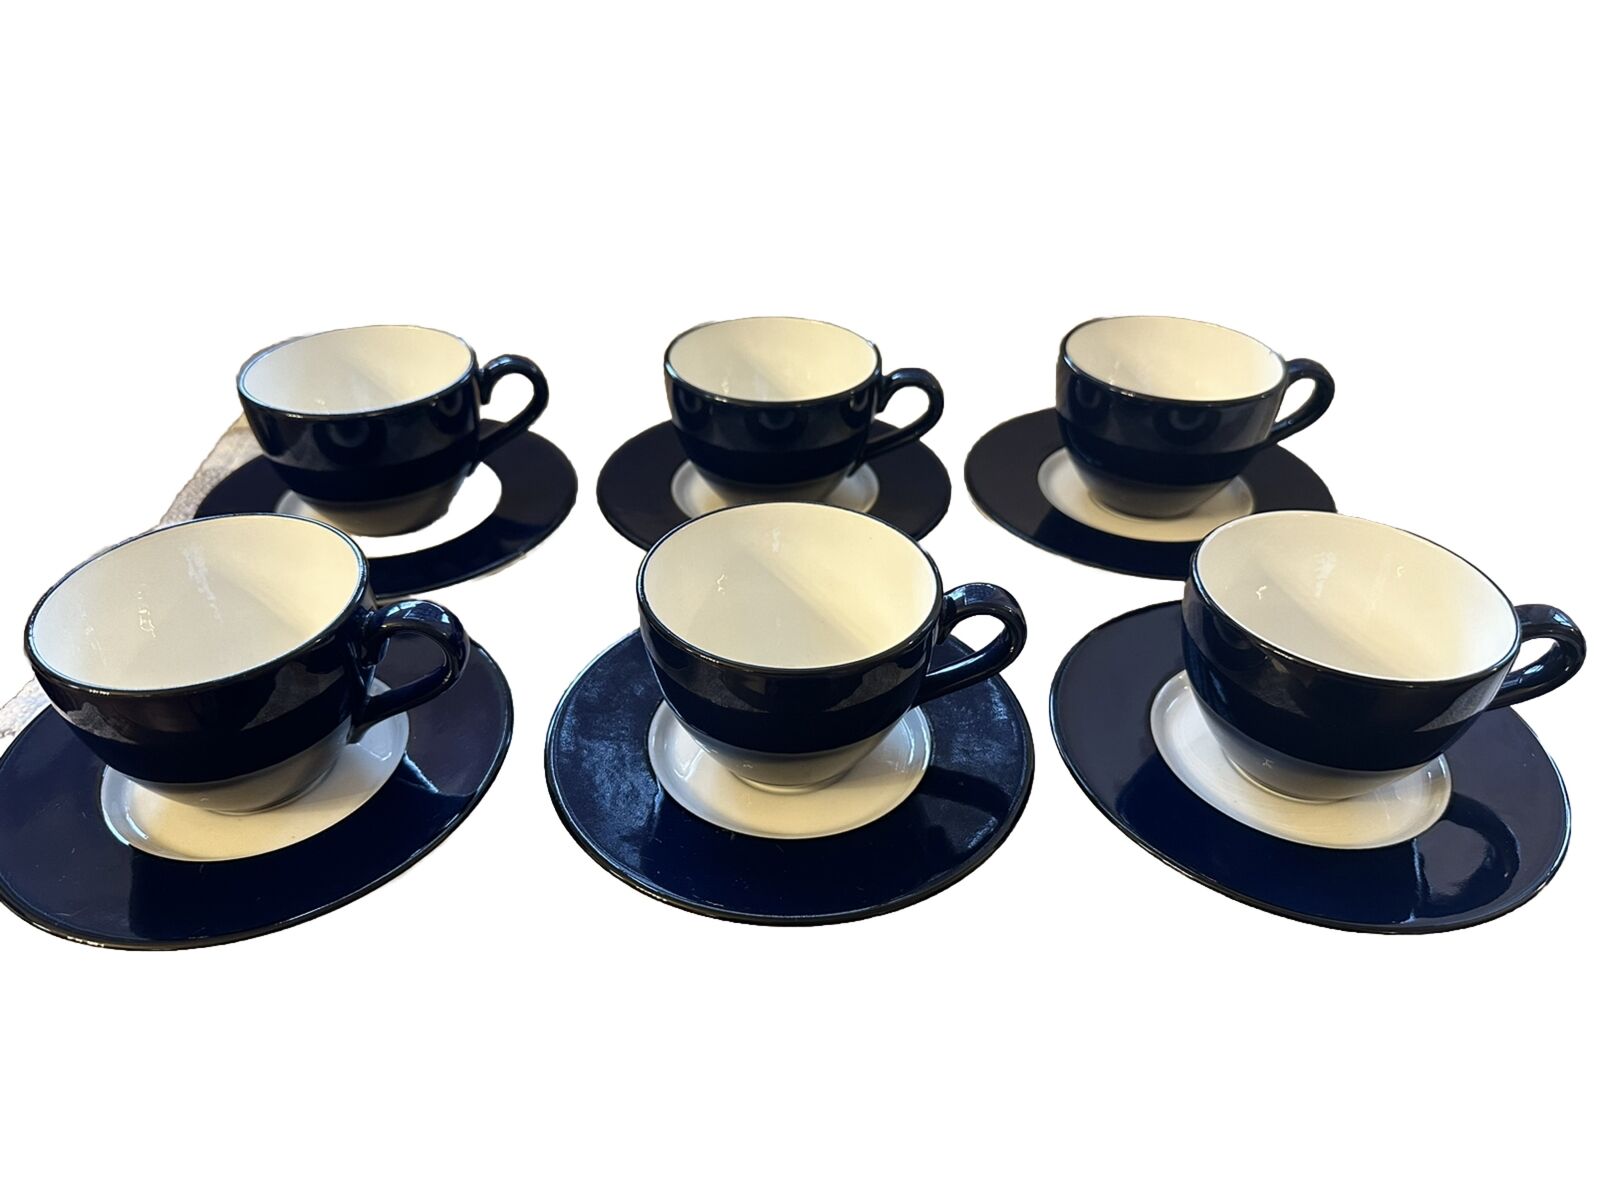 Vintage Italian Pagnossin Trevino Blue Coffee Cups and Saucers - Set of 6